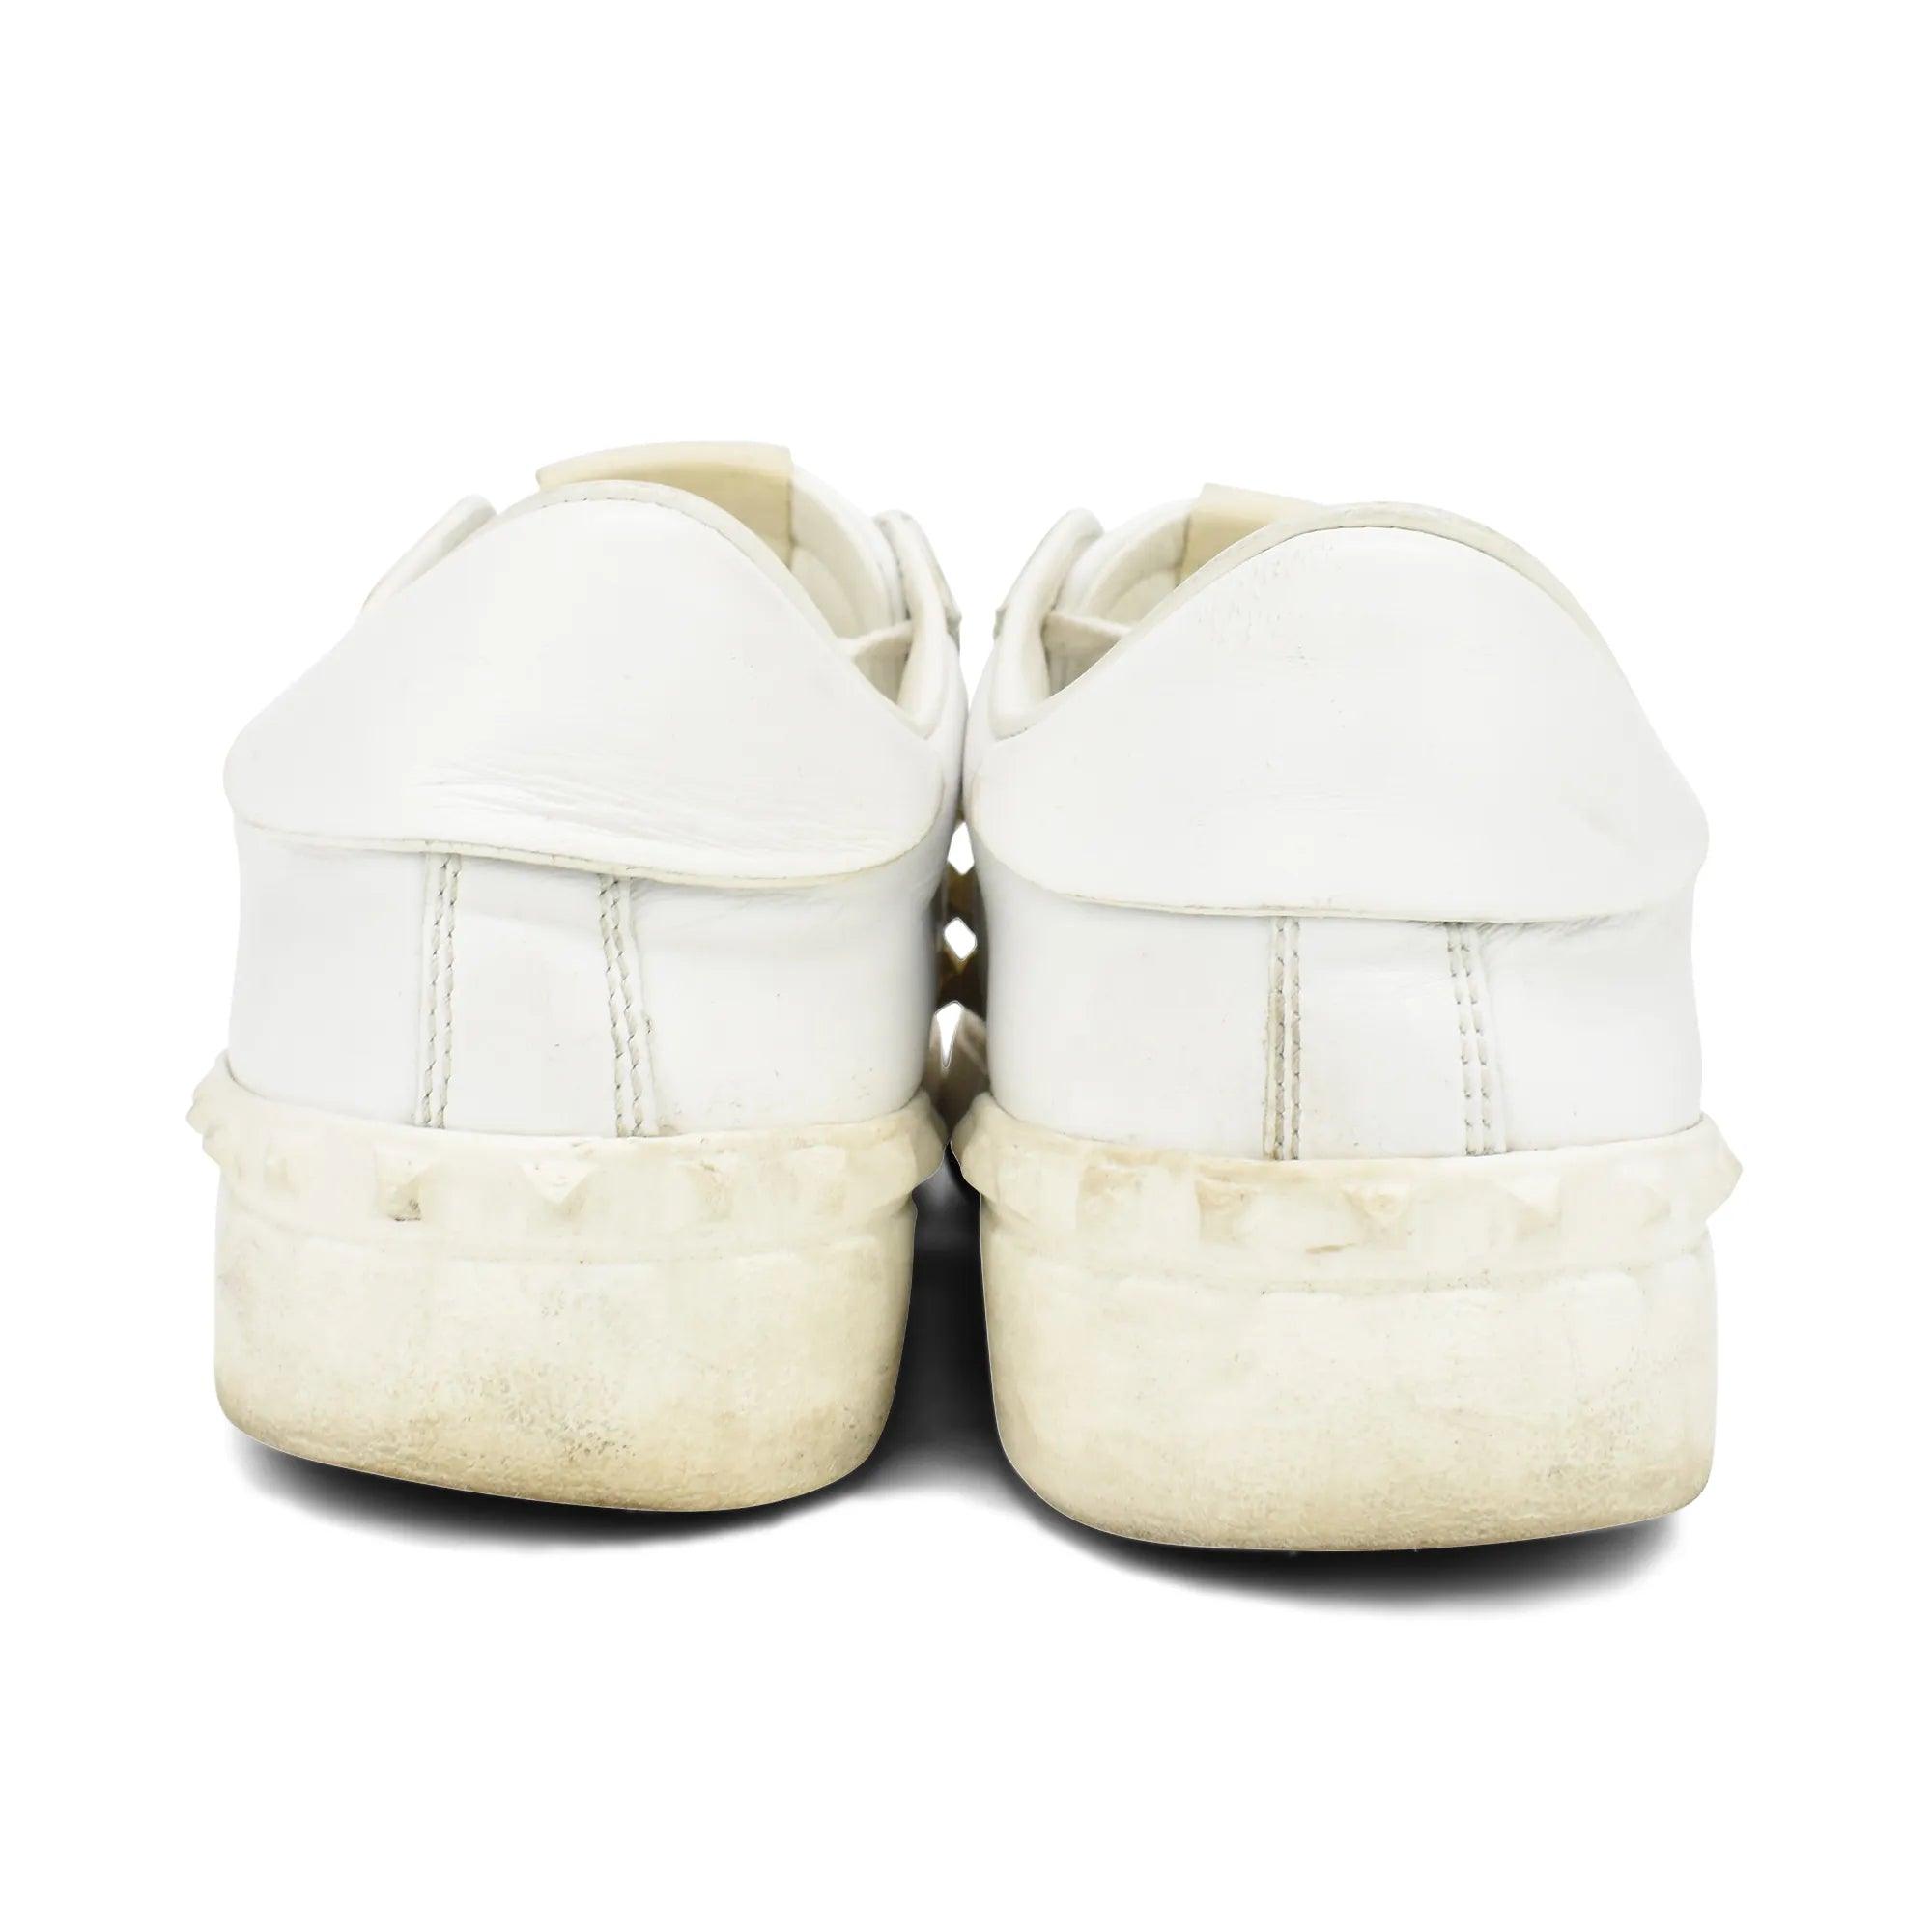 Valentino Sneakers - Women's 39 - Fashionably Yours